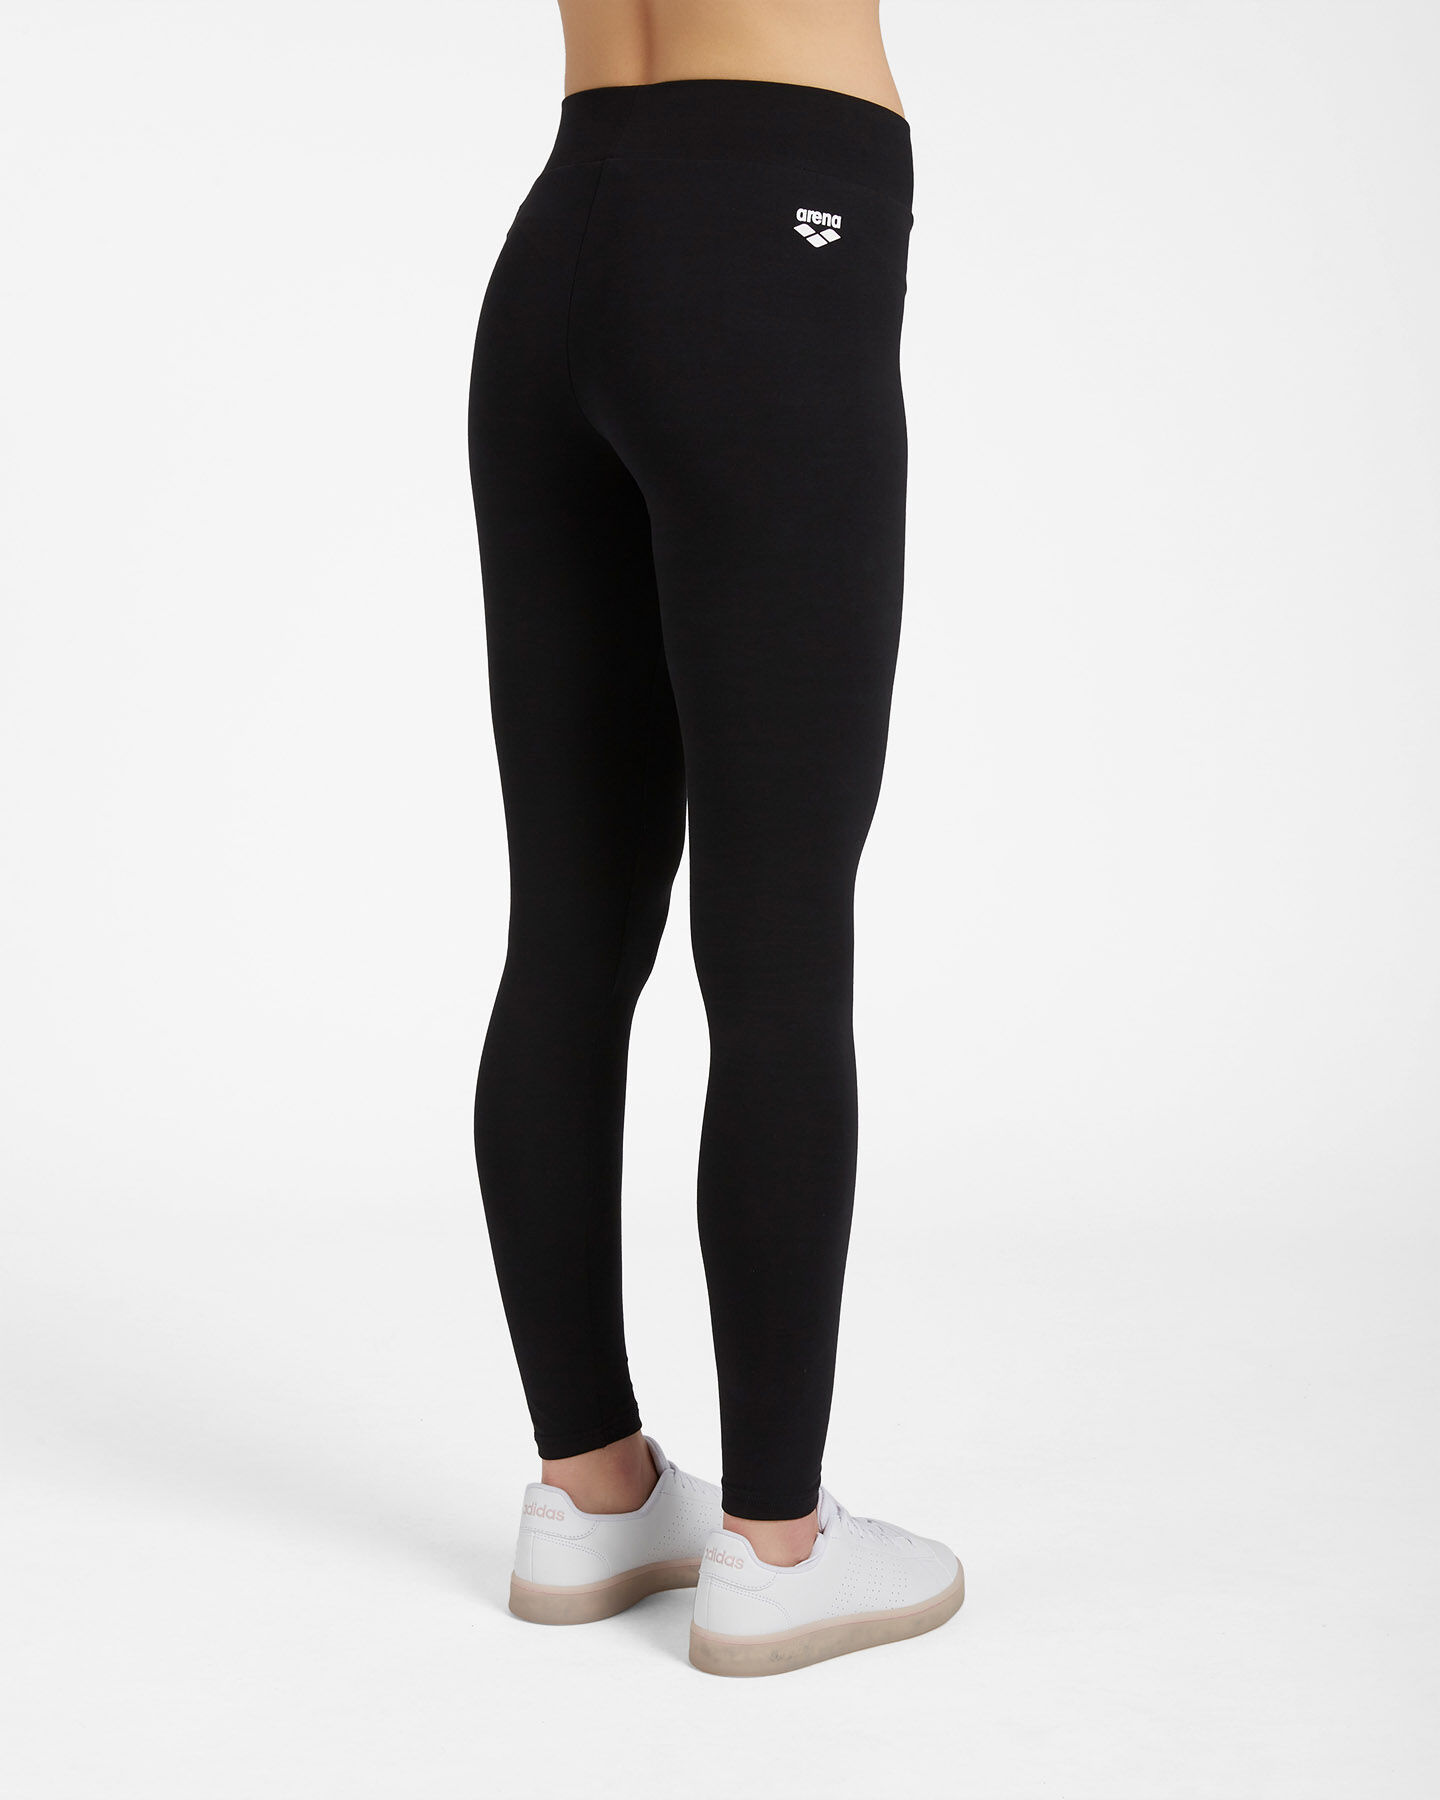  Leggings ARENA JSTRETCH PERFORM W S4087556|050|XS scatto 1